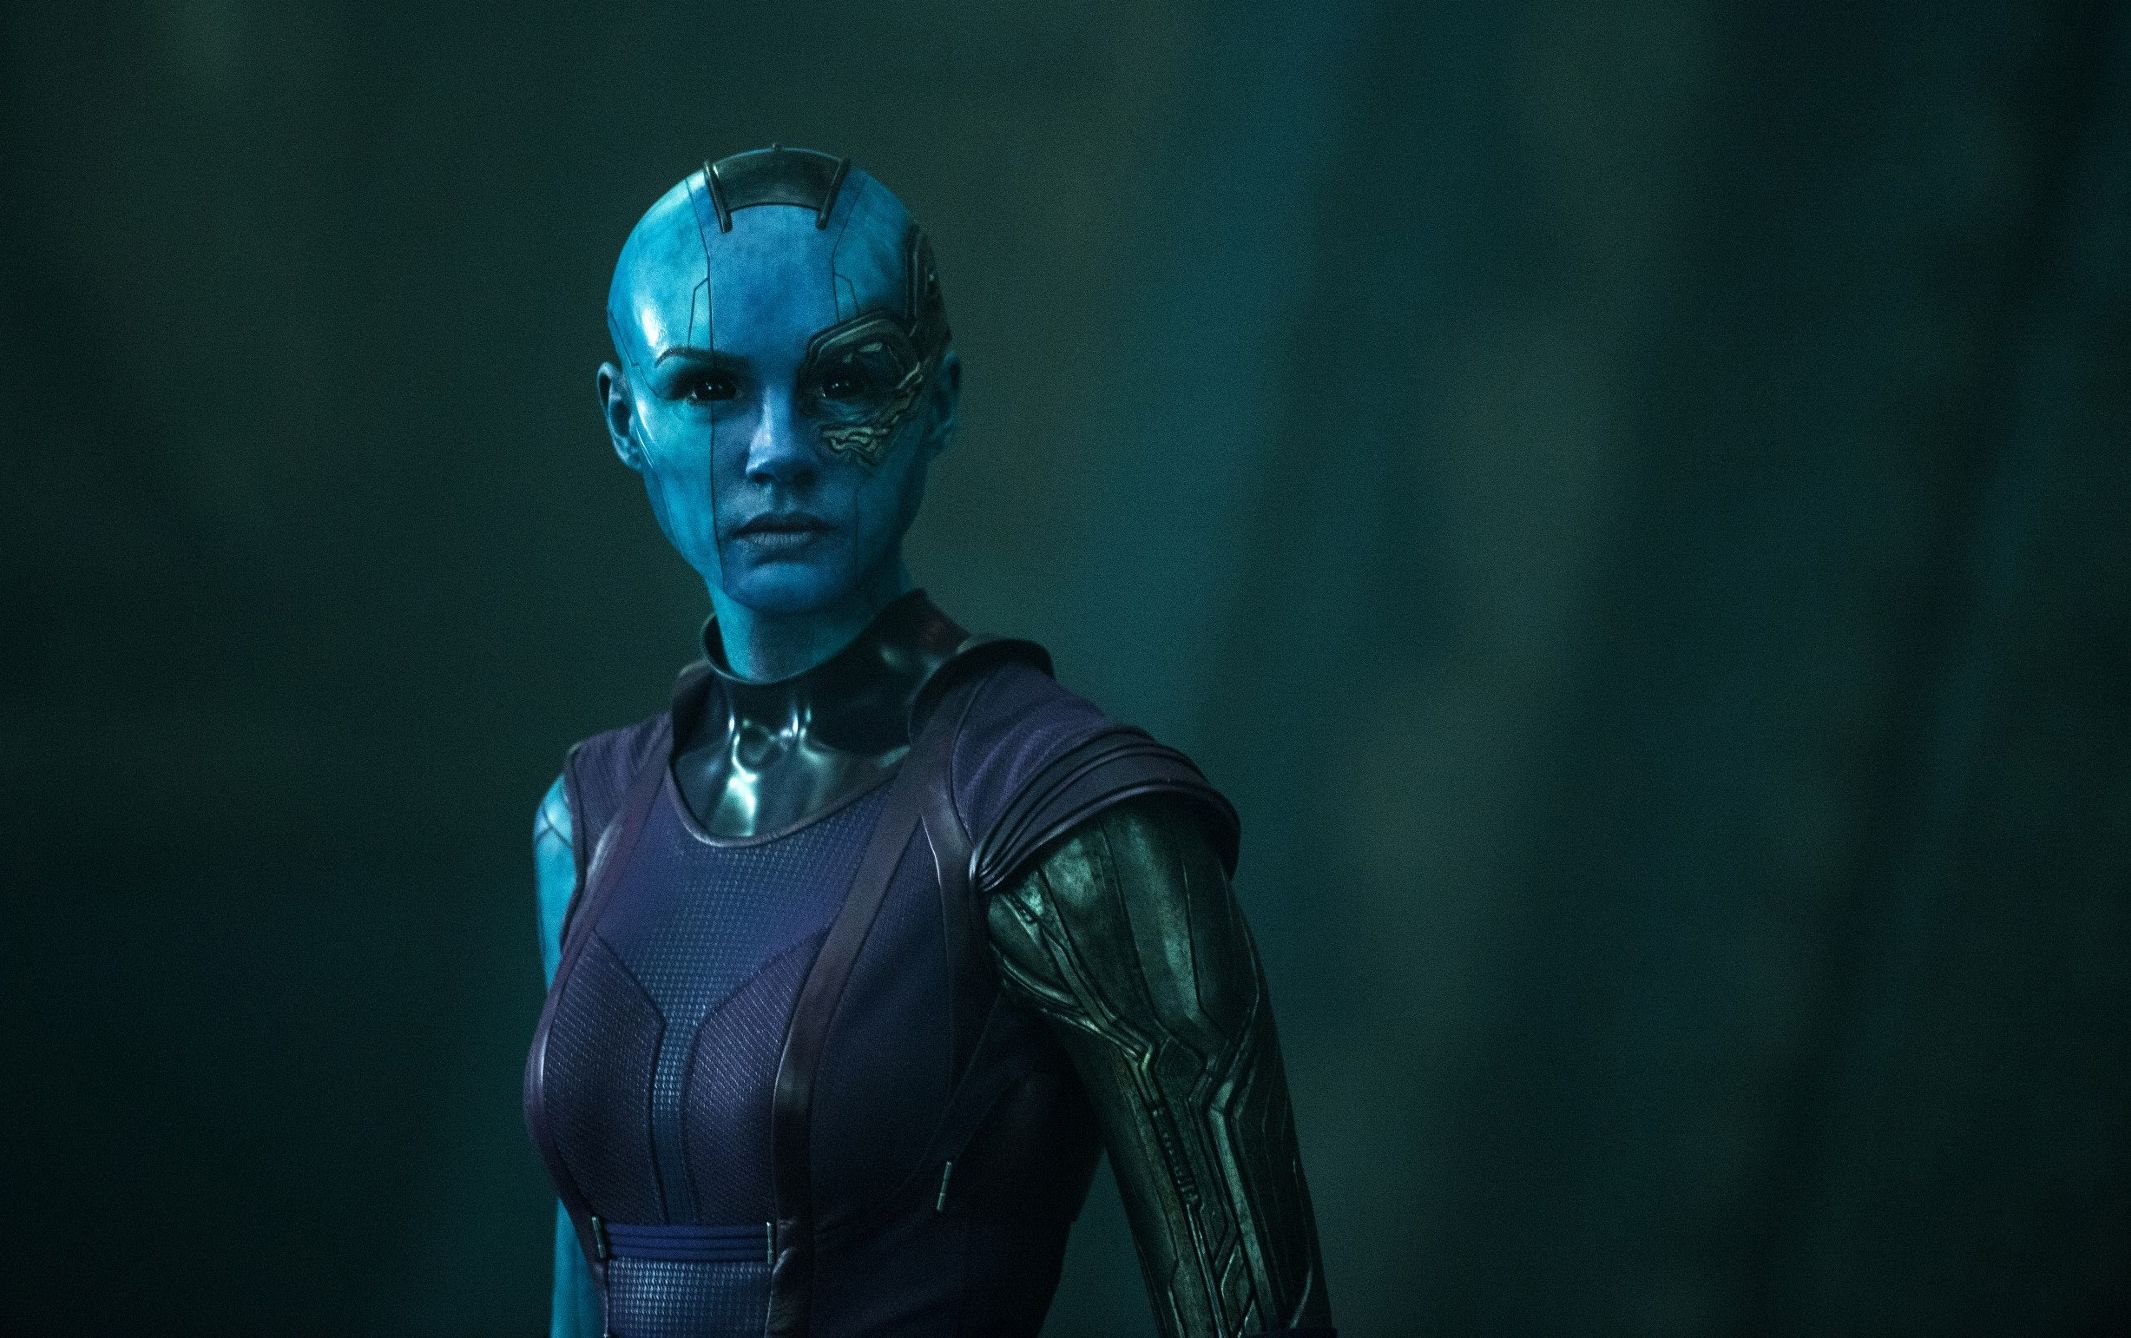 Space pirate Nebula in the 'Guardians of the Galaxy'